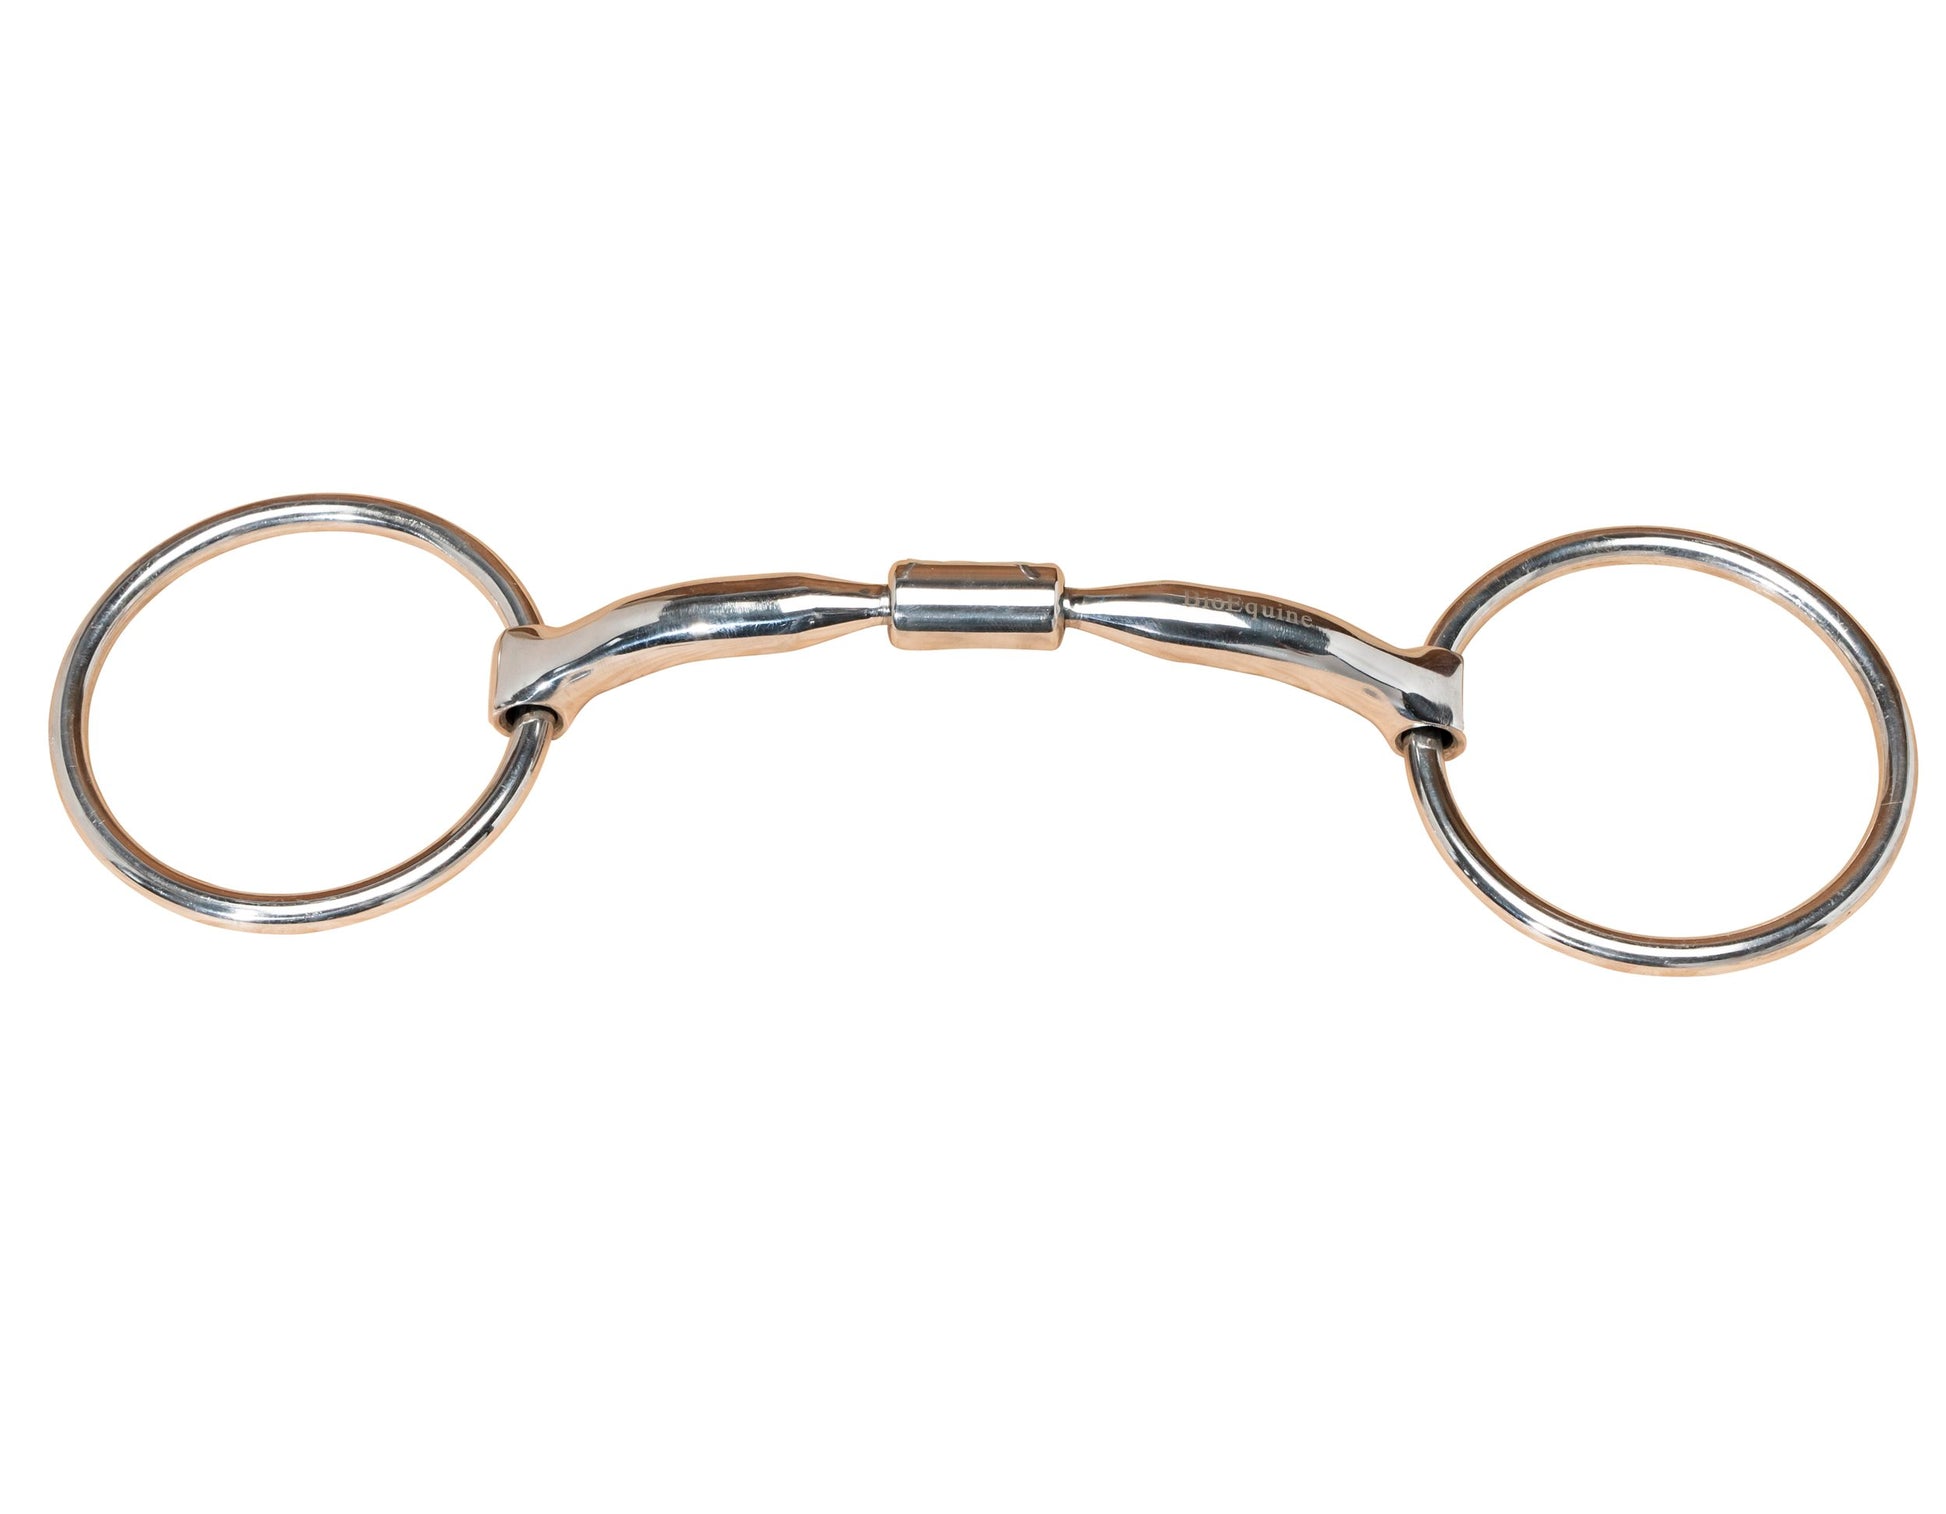 Horse bit, two rings with flexible metal connector